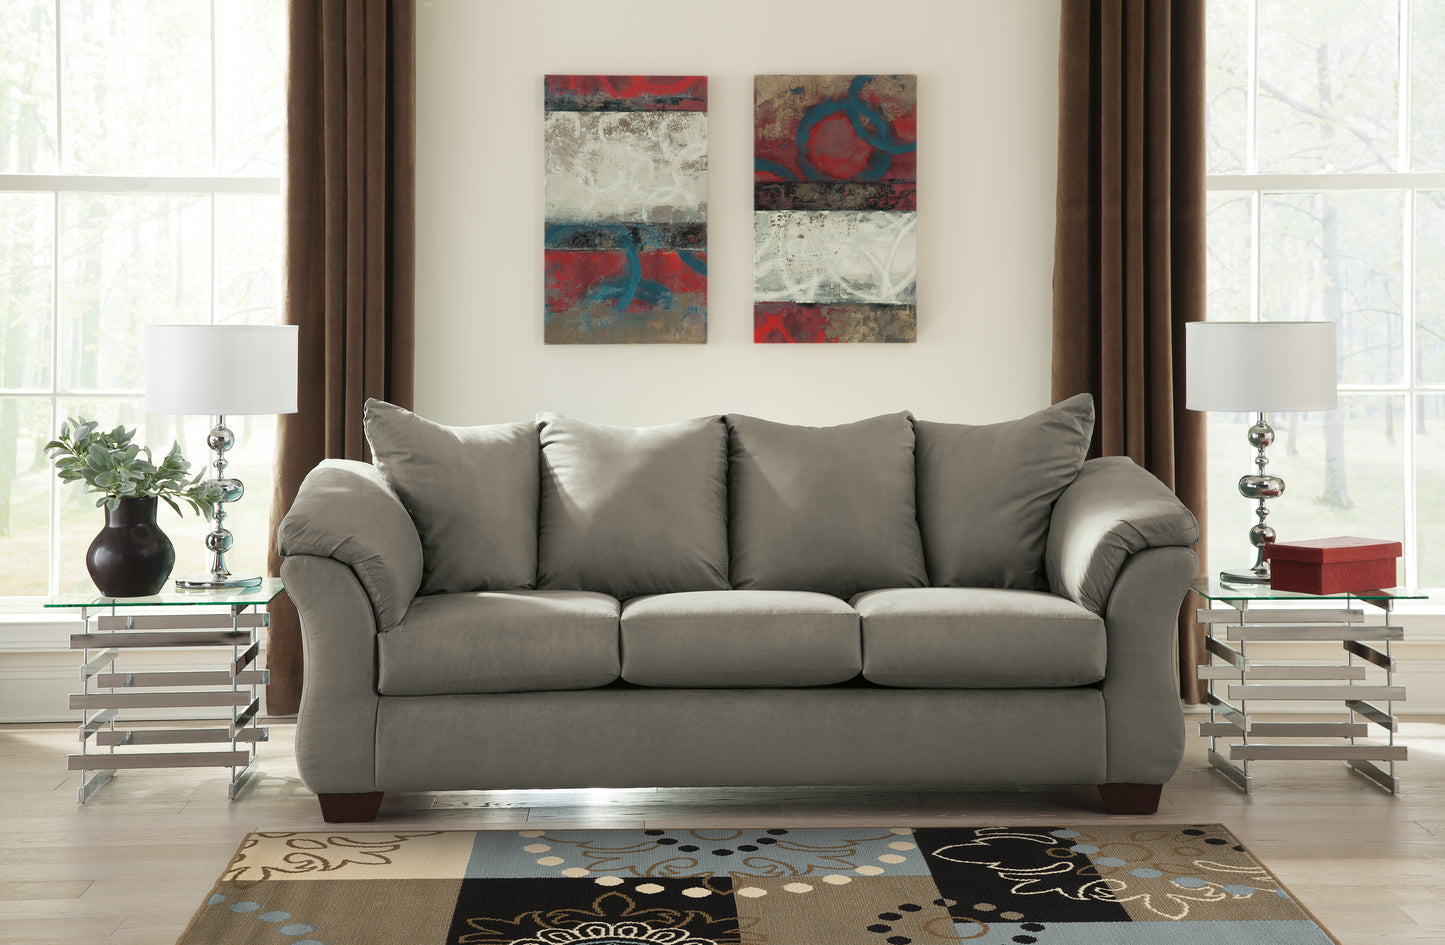 Darcy Sofa Chaise and Loveseat - PKG012407